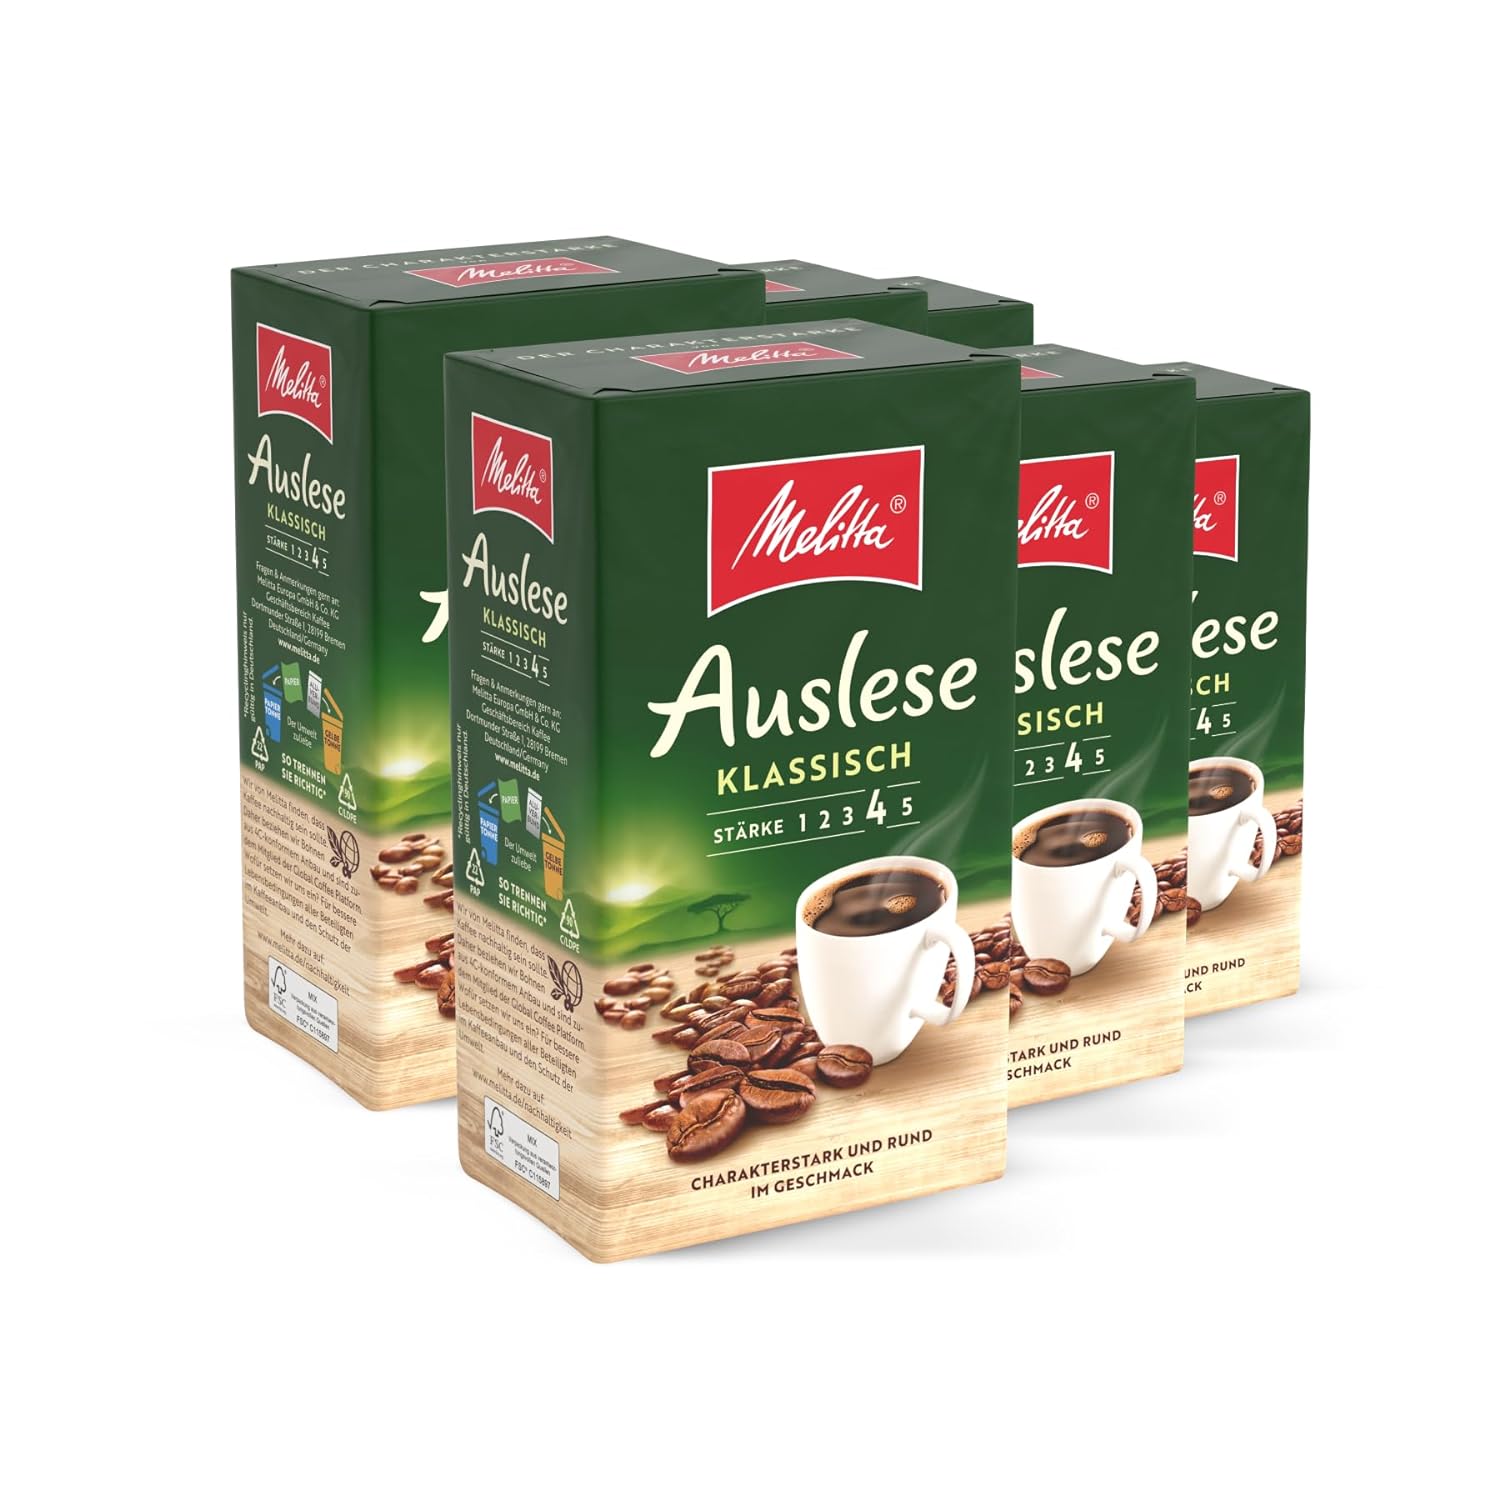 Melitta Auslese Filter Coffee 6 x 500 g, Ground, Powder for Filter Coffee Machines, Strong Roasting, Roasted in Germany, in Tray